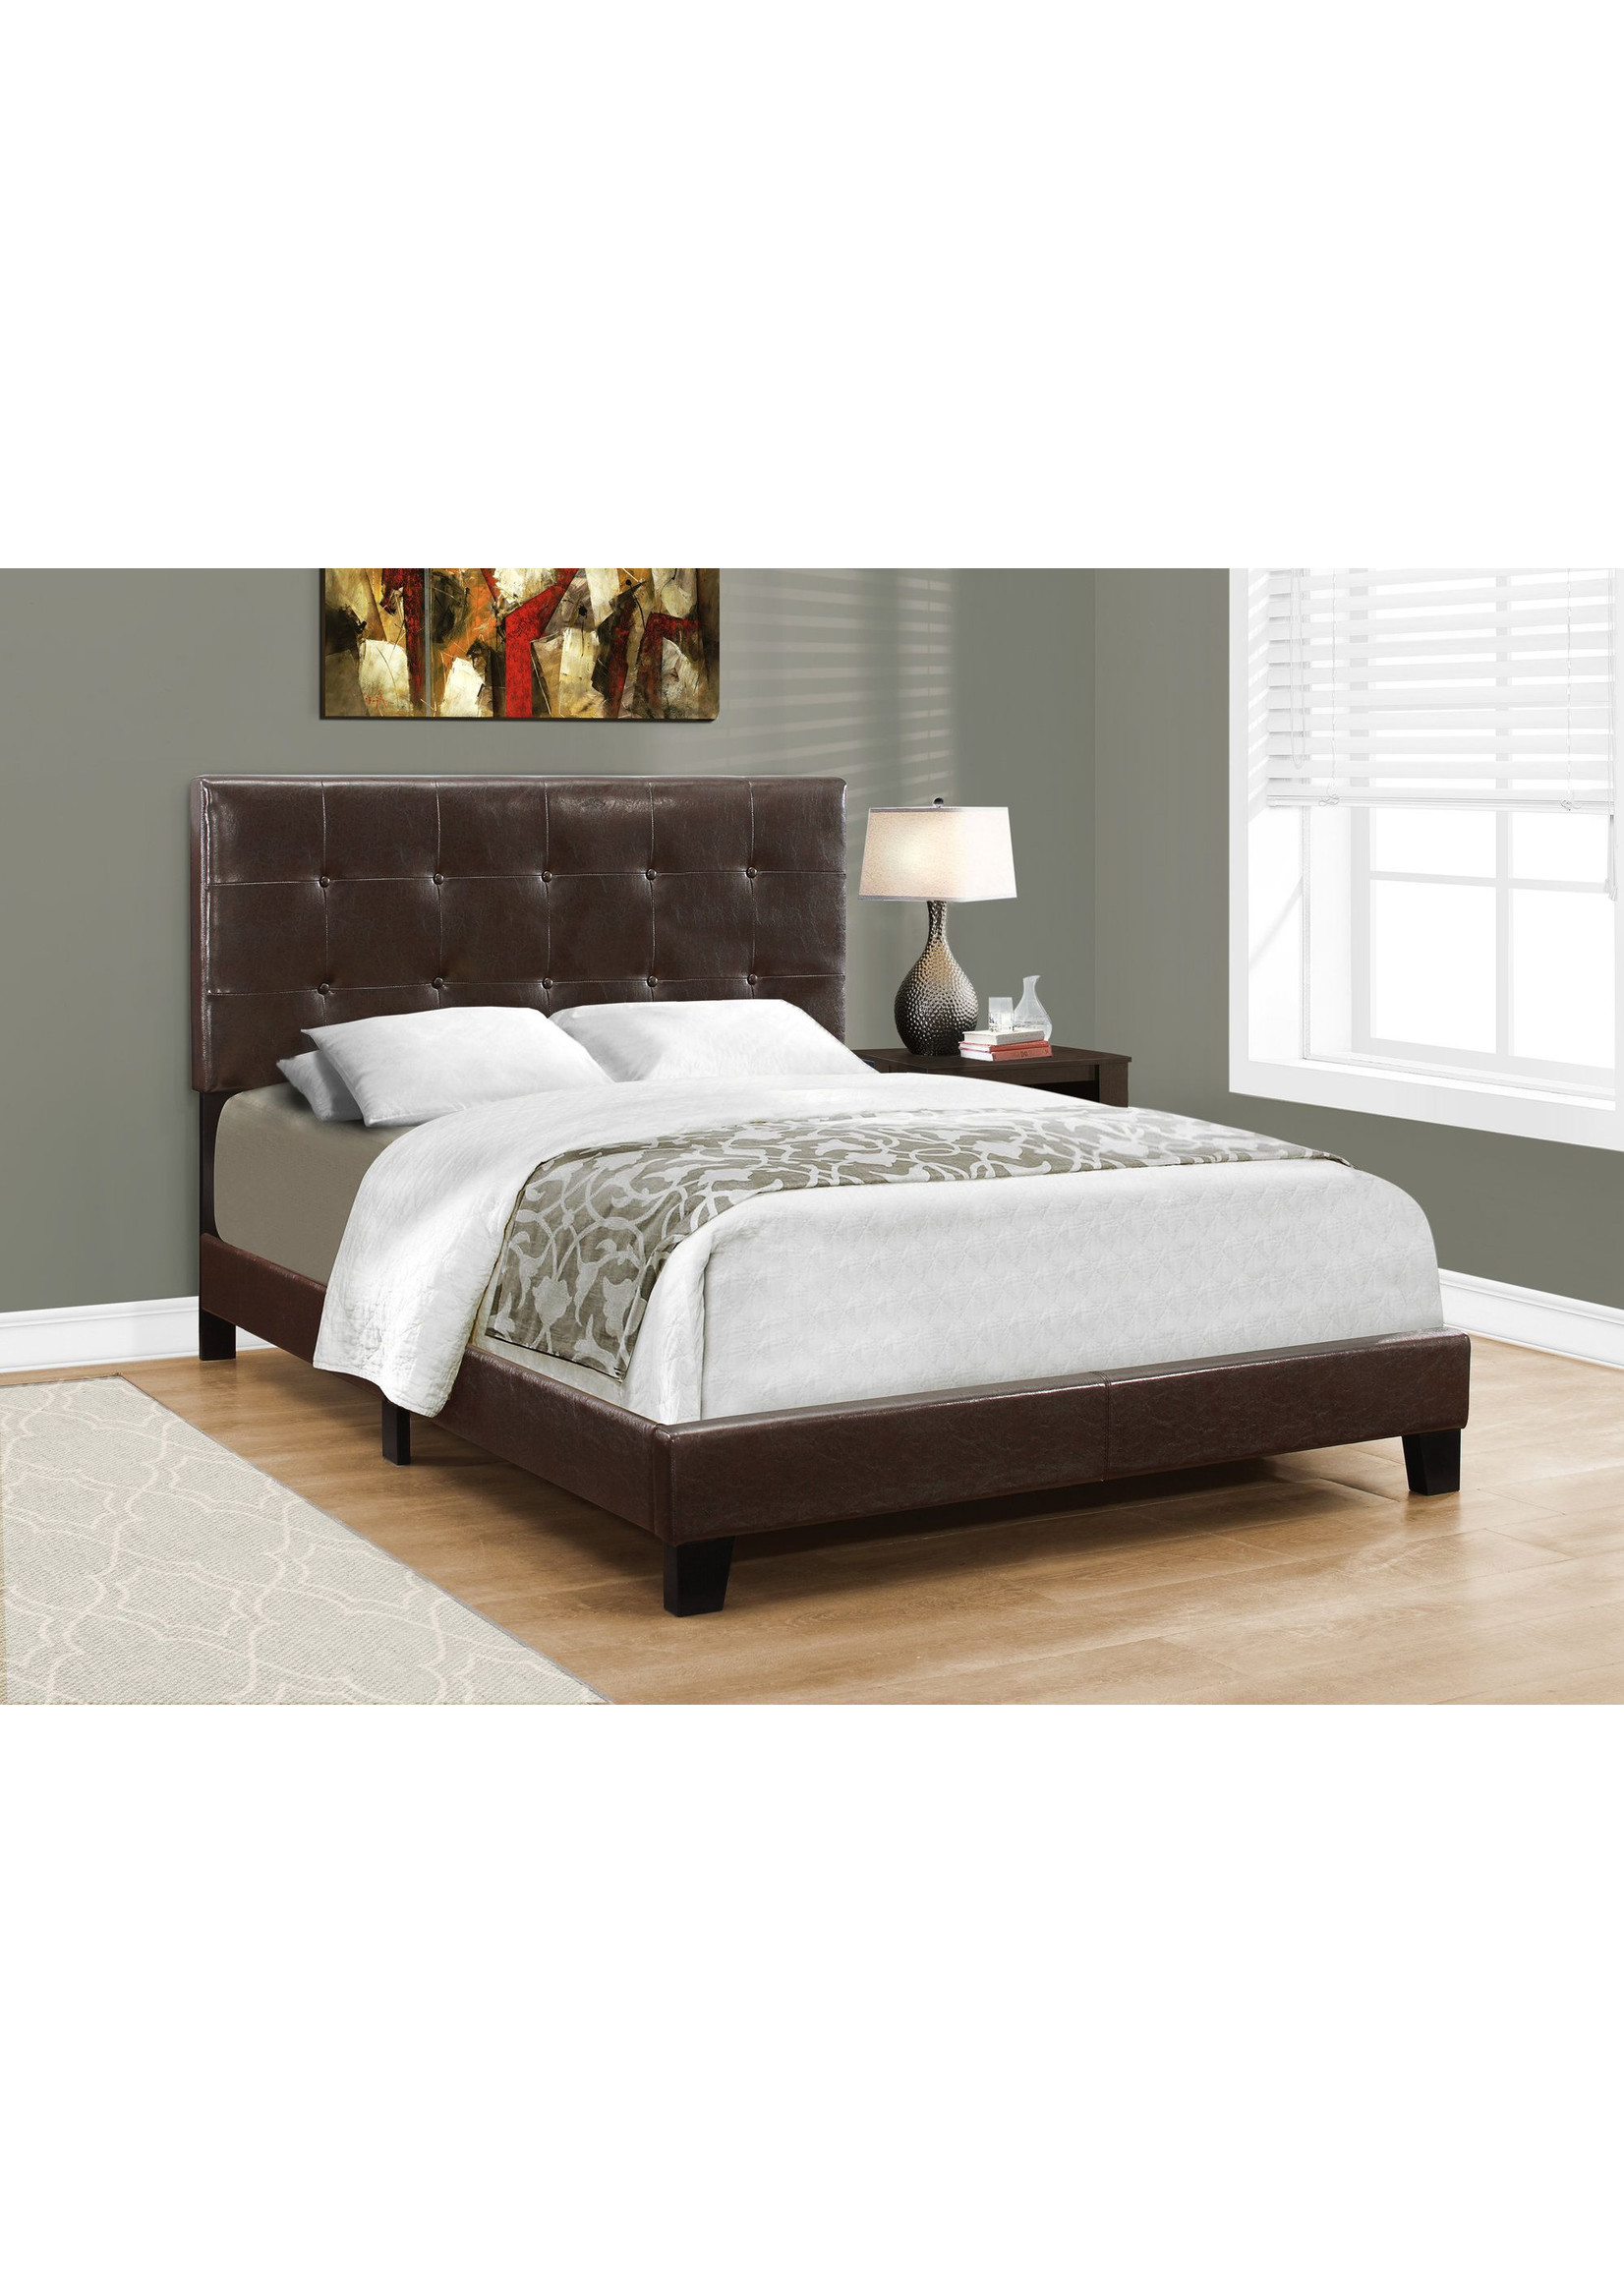 DARK BROWN FAUX LEATHER BED FRAME